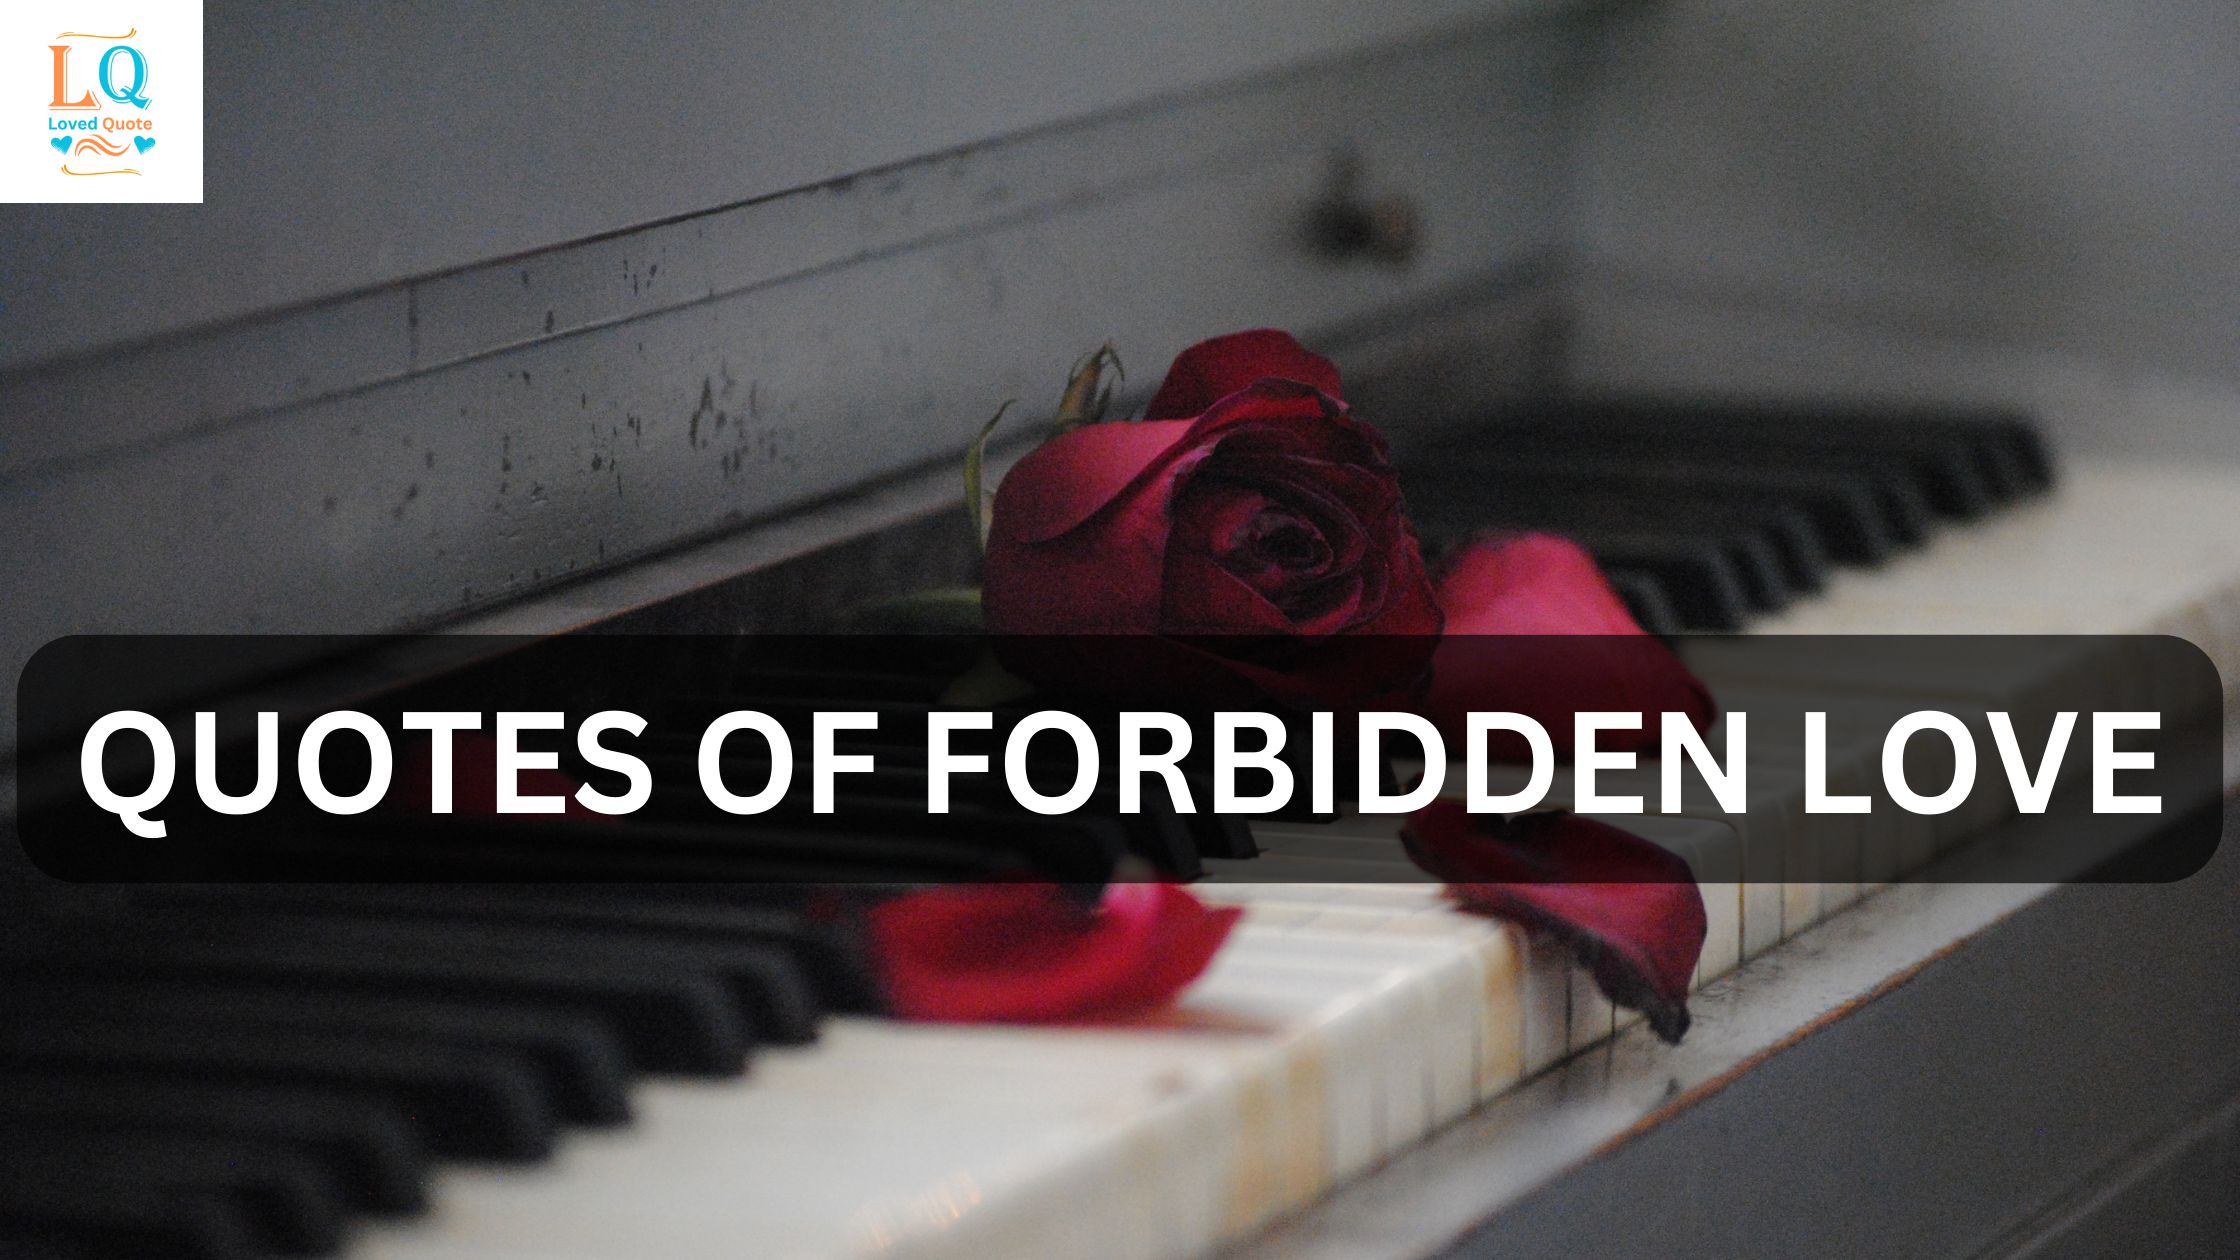 Quotes of Forbidden Love